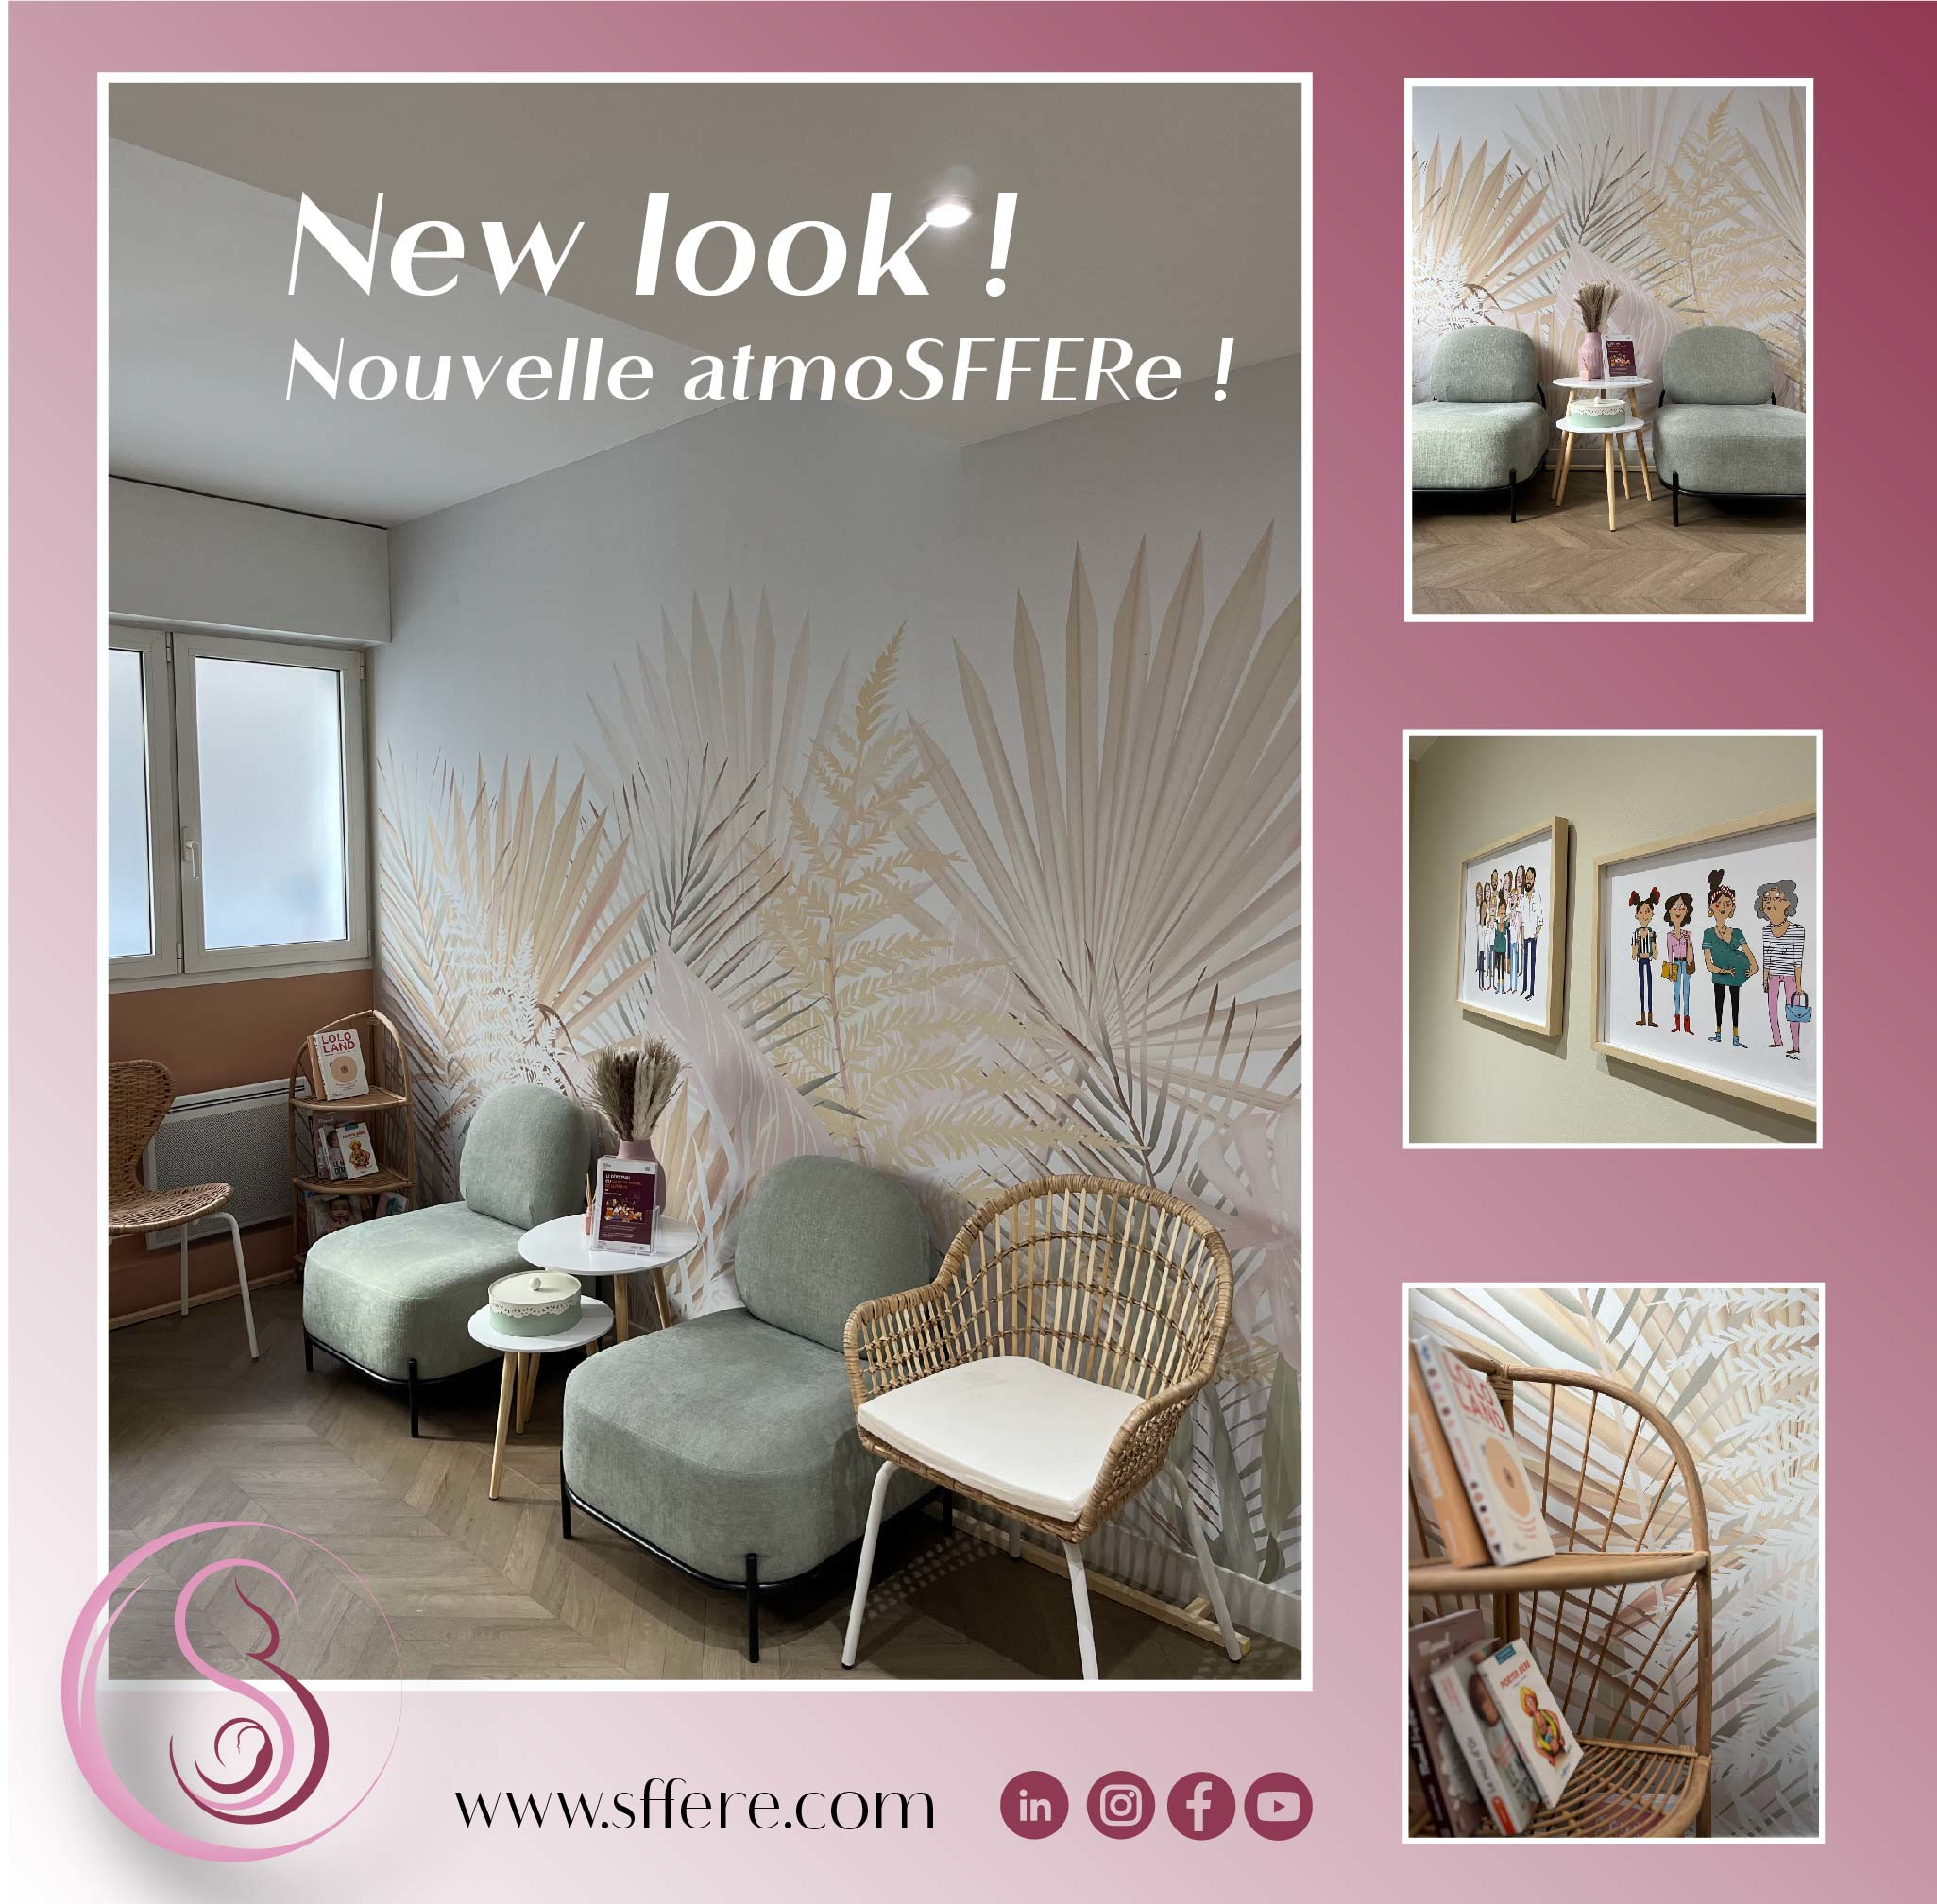 New look! Nouvelle atmoSFFERe!